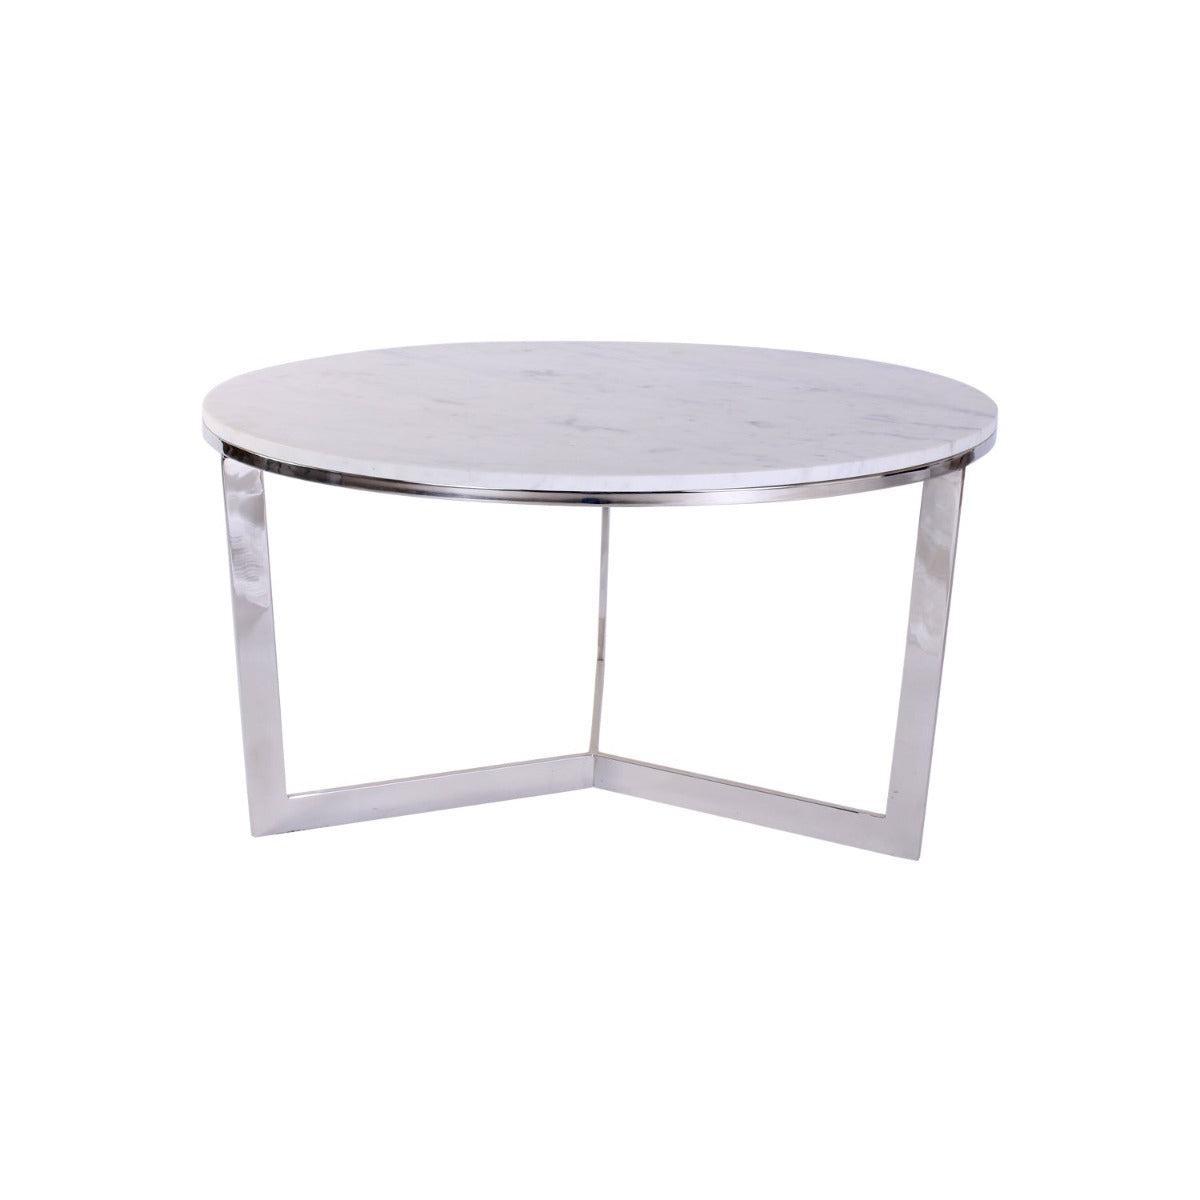 Mackey Marble Coffee Table In Chrome Finish